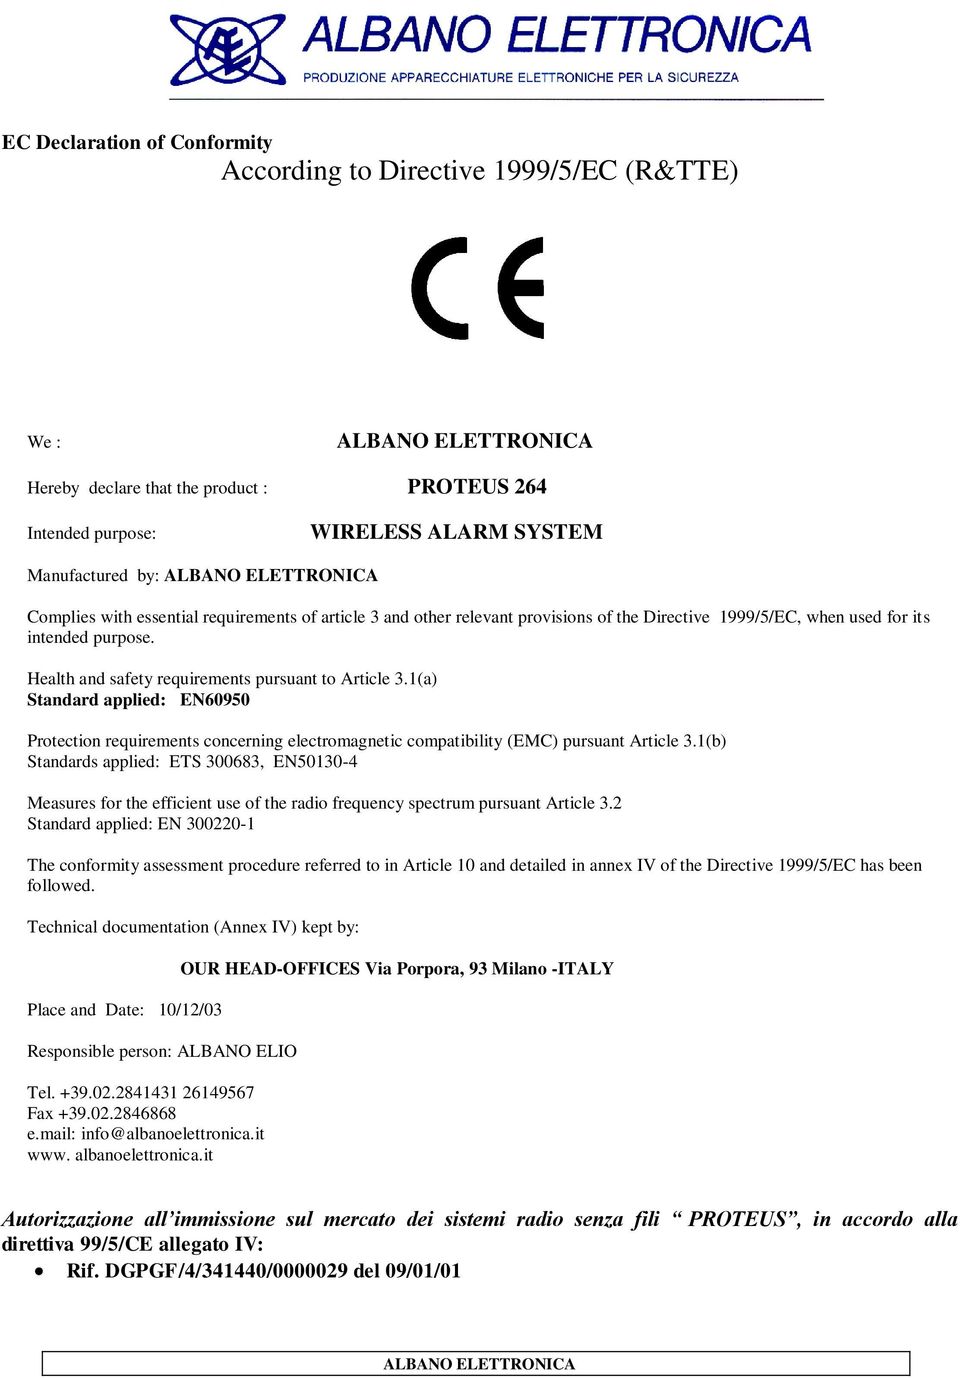 Health and safety requirements pursuant to Article 3.1(a) Standard applied: EN60950 Protection requirements concerning electromagnetic compatibility (EMC) pursuant Article 3.